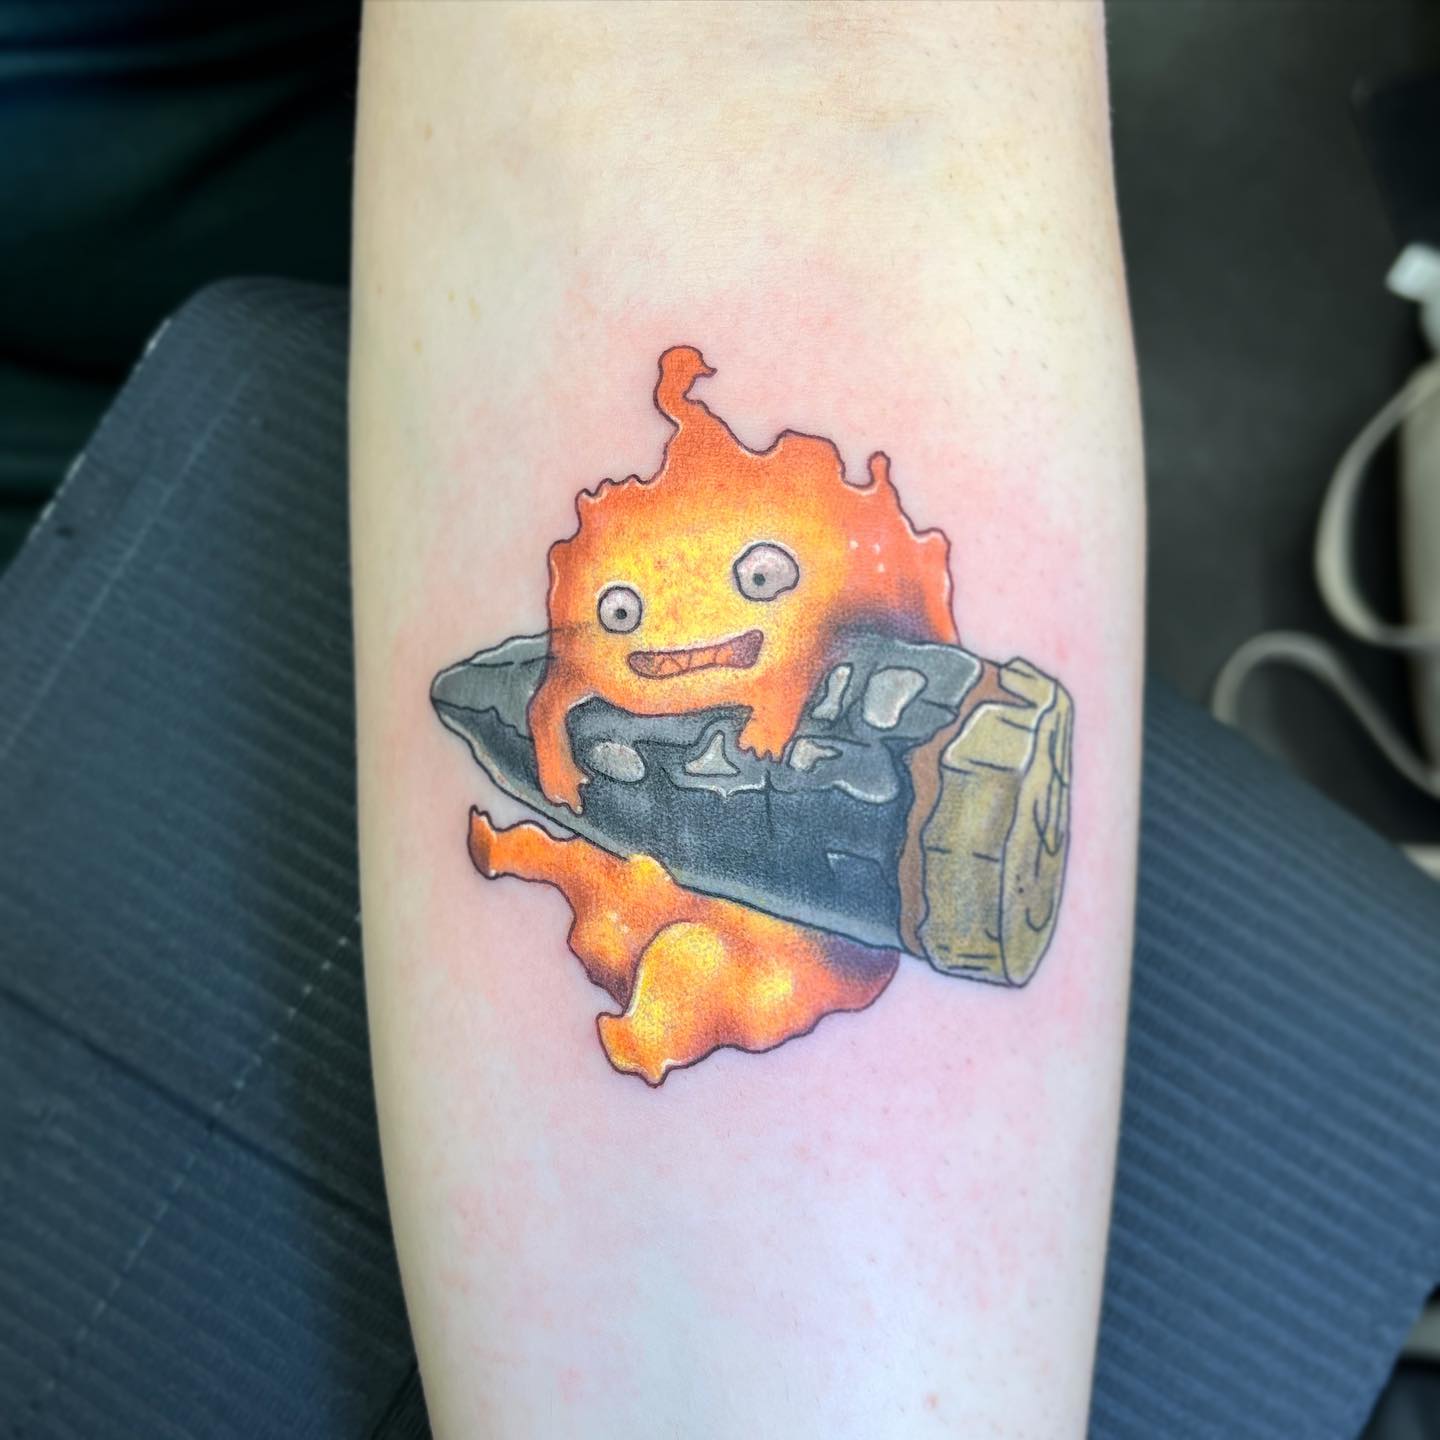 Here's another curse for you - may all your bacon burn!

Thank you CJ for sitting so well for this cute wee guy! Had a lovely time meeting you. 

                    